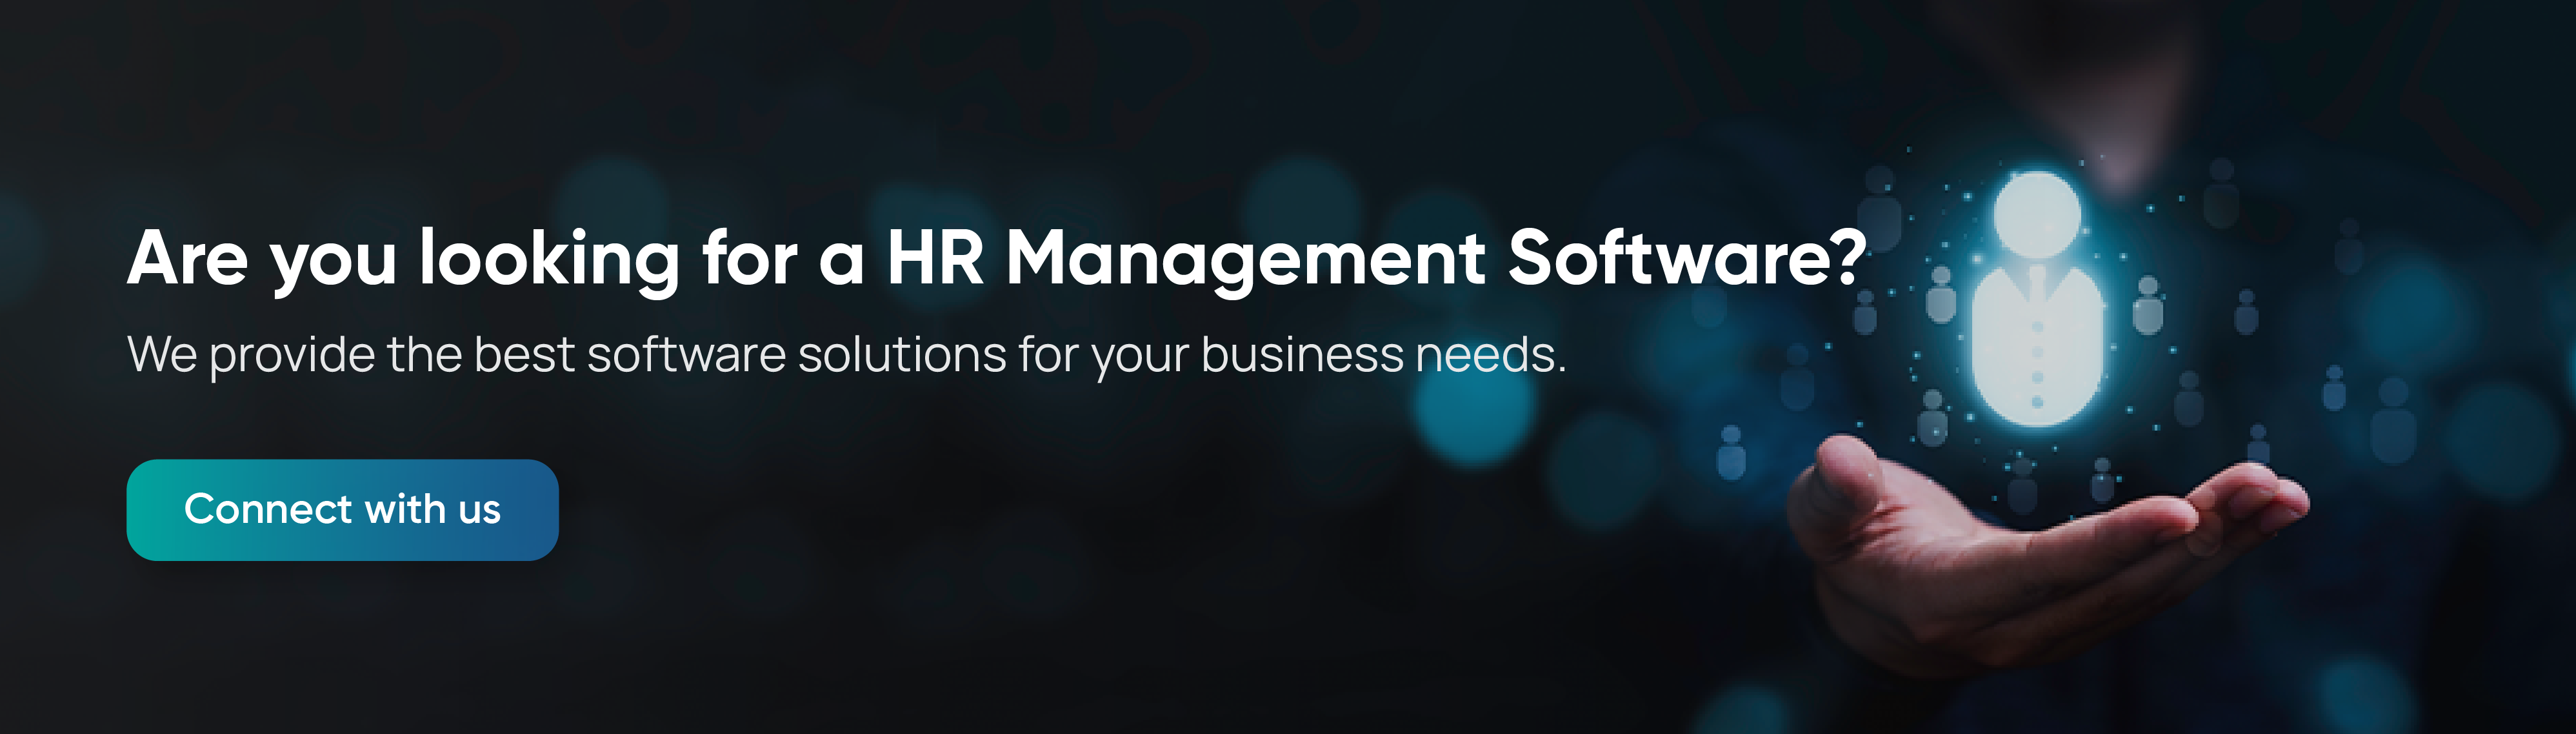 HR Management software for small business